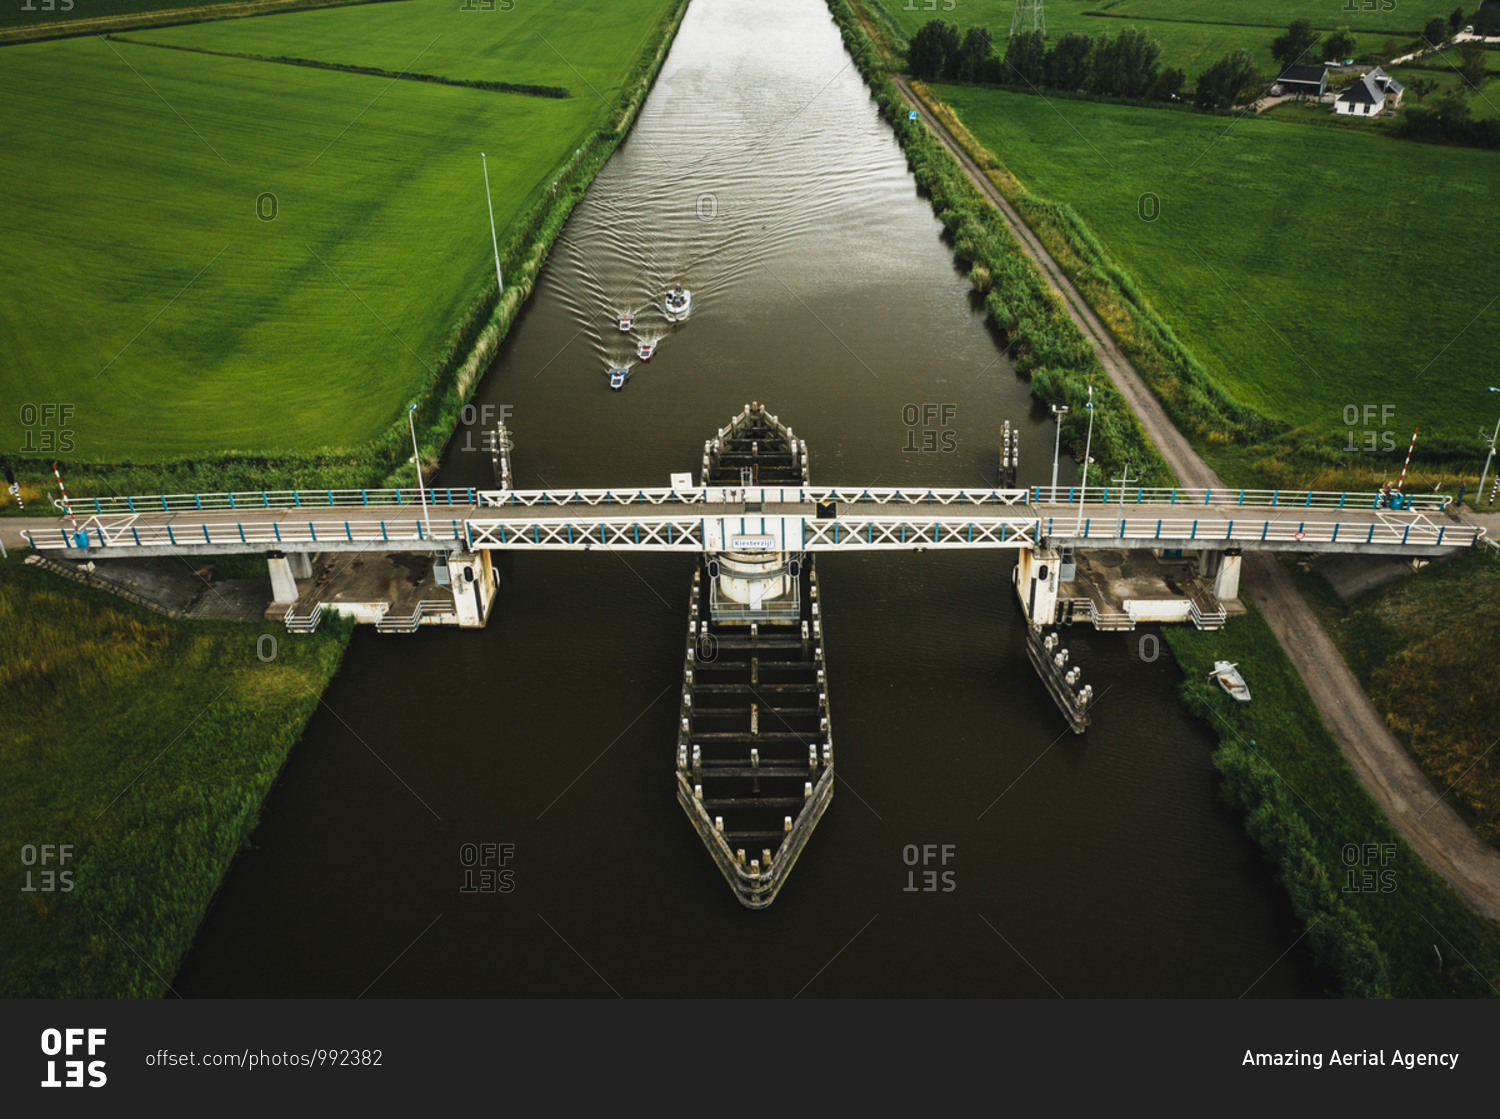 Aerial view of solar panel boats navigating through the farmlands of Harlingen, Friesland, The Netherlands.